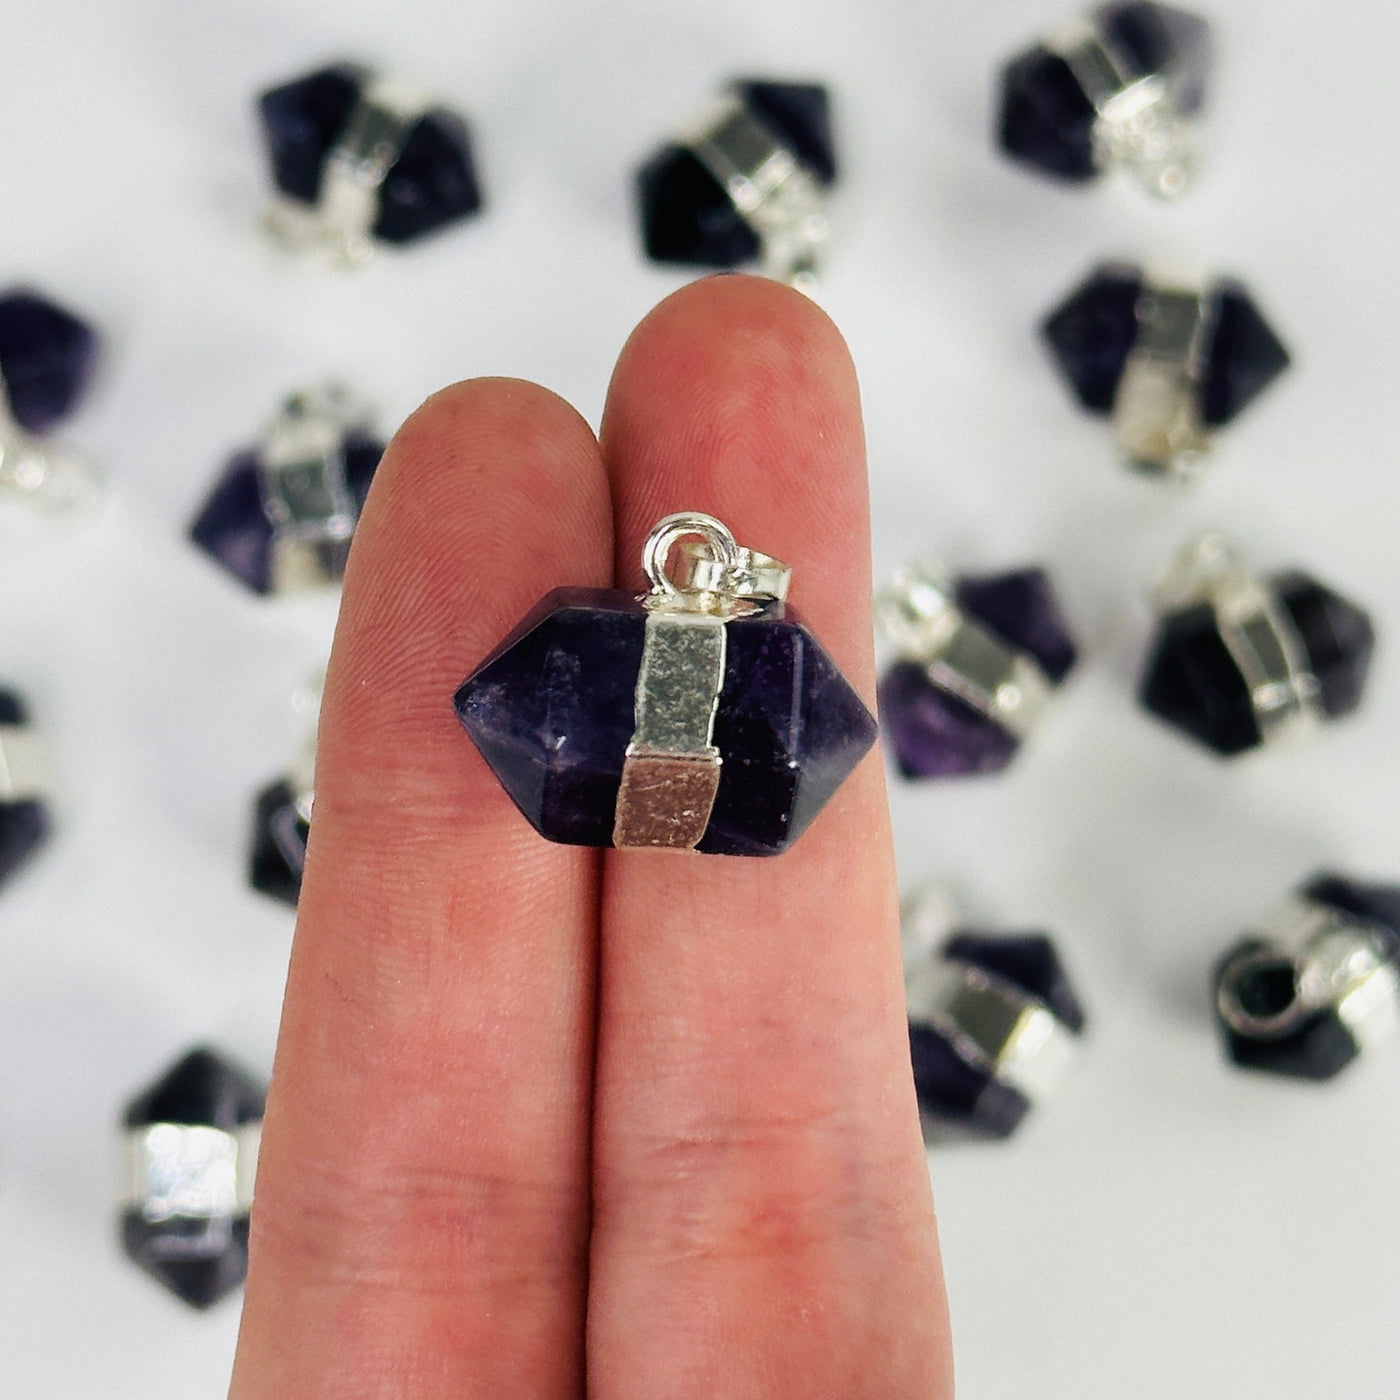 fingers holding up amethyst pendant with others in the background